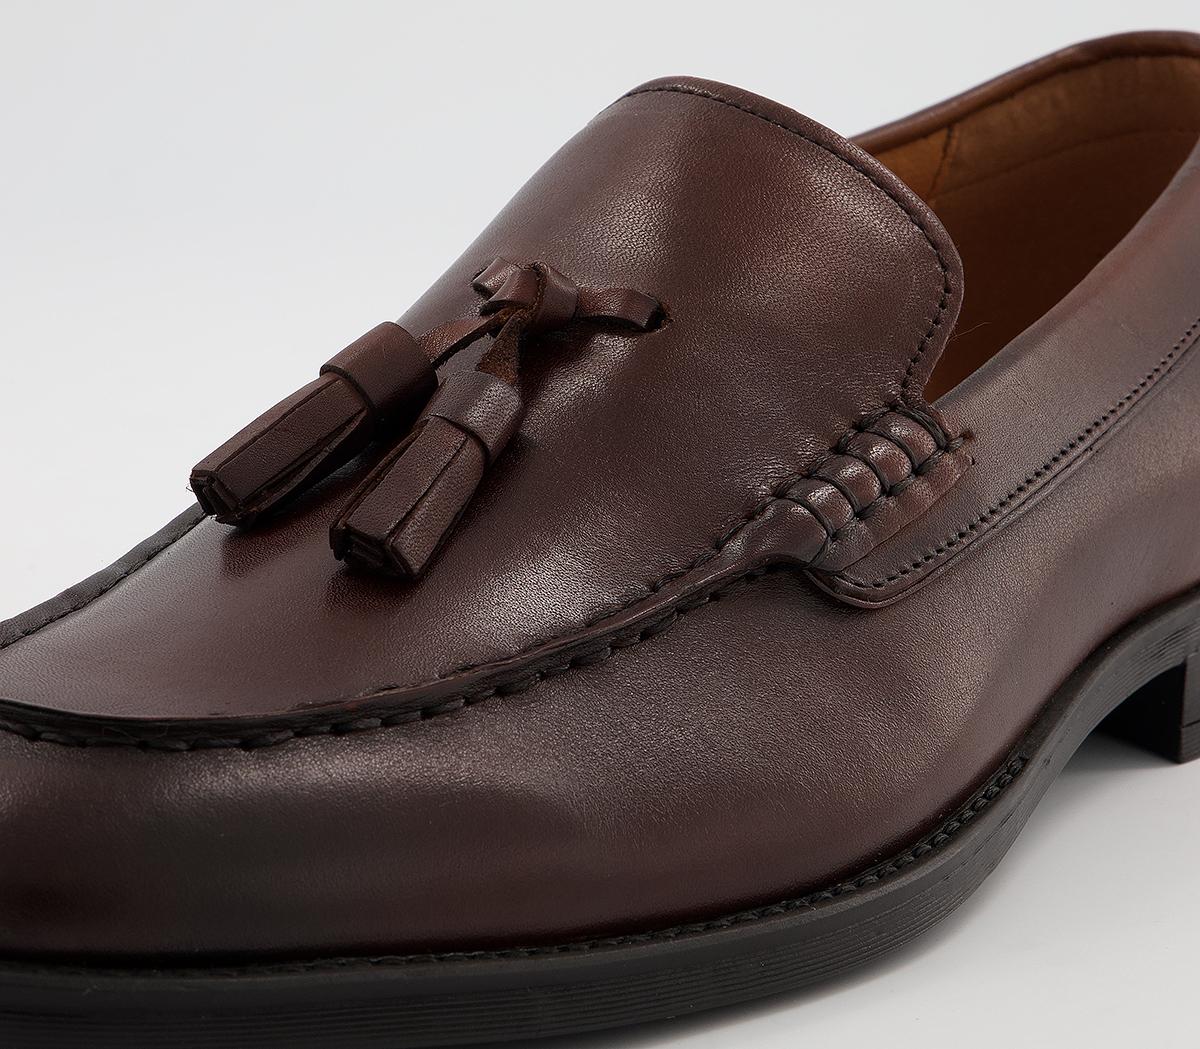 OFFICE Maverick Loafers Brown Leather - Men’s Smart Shoes